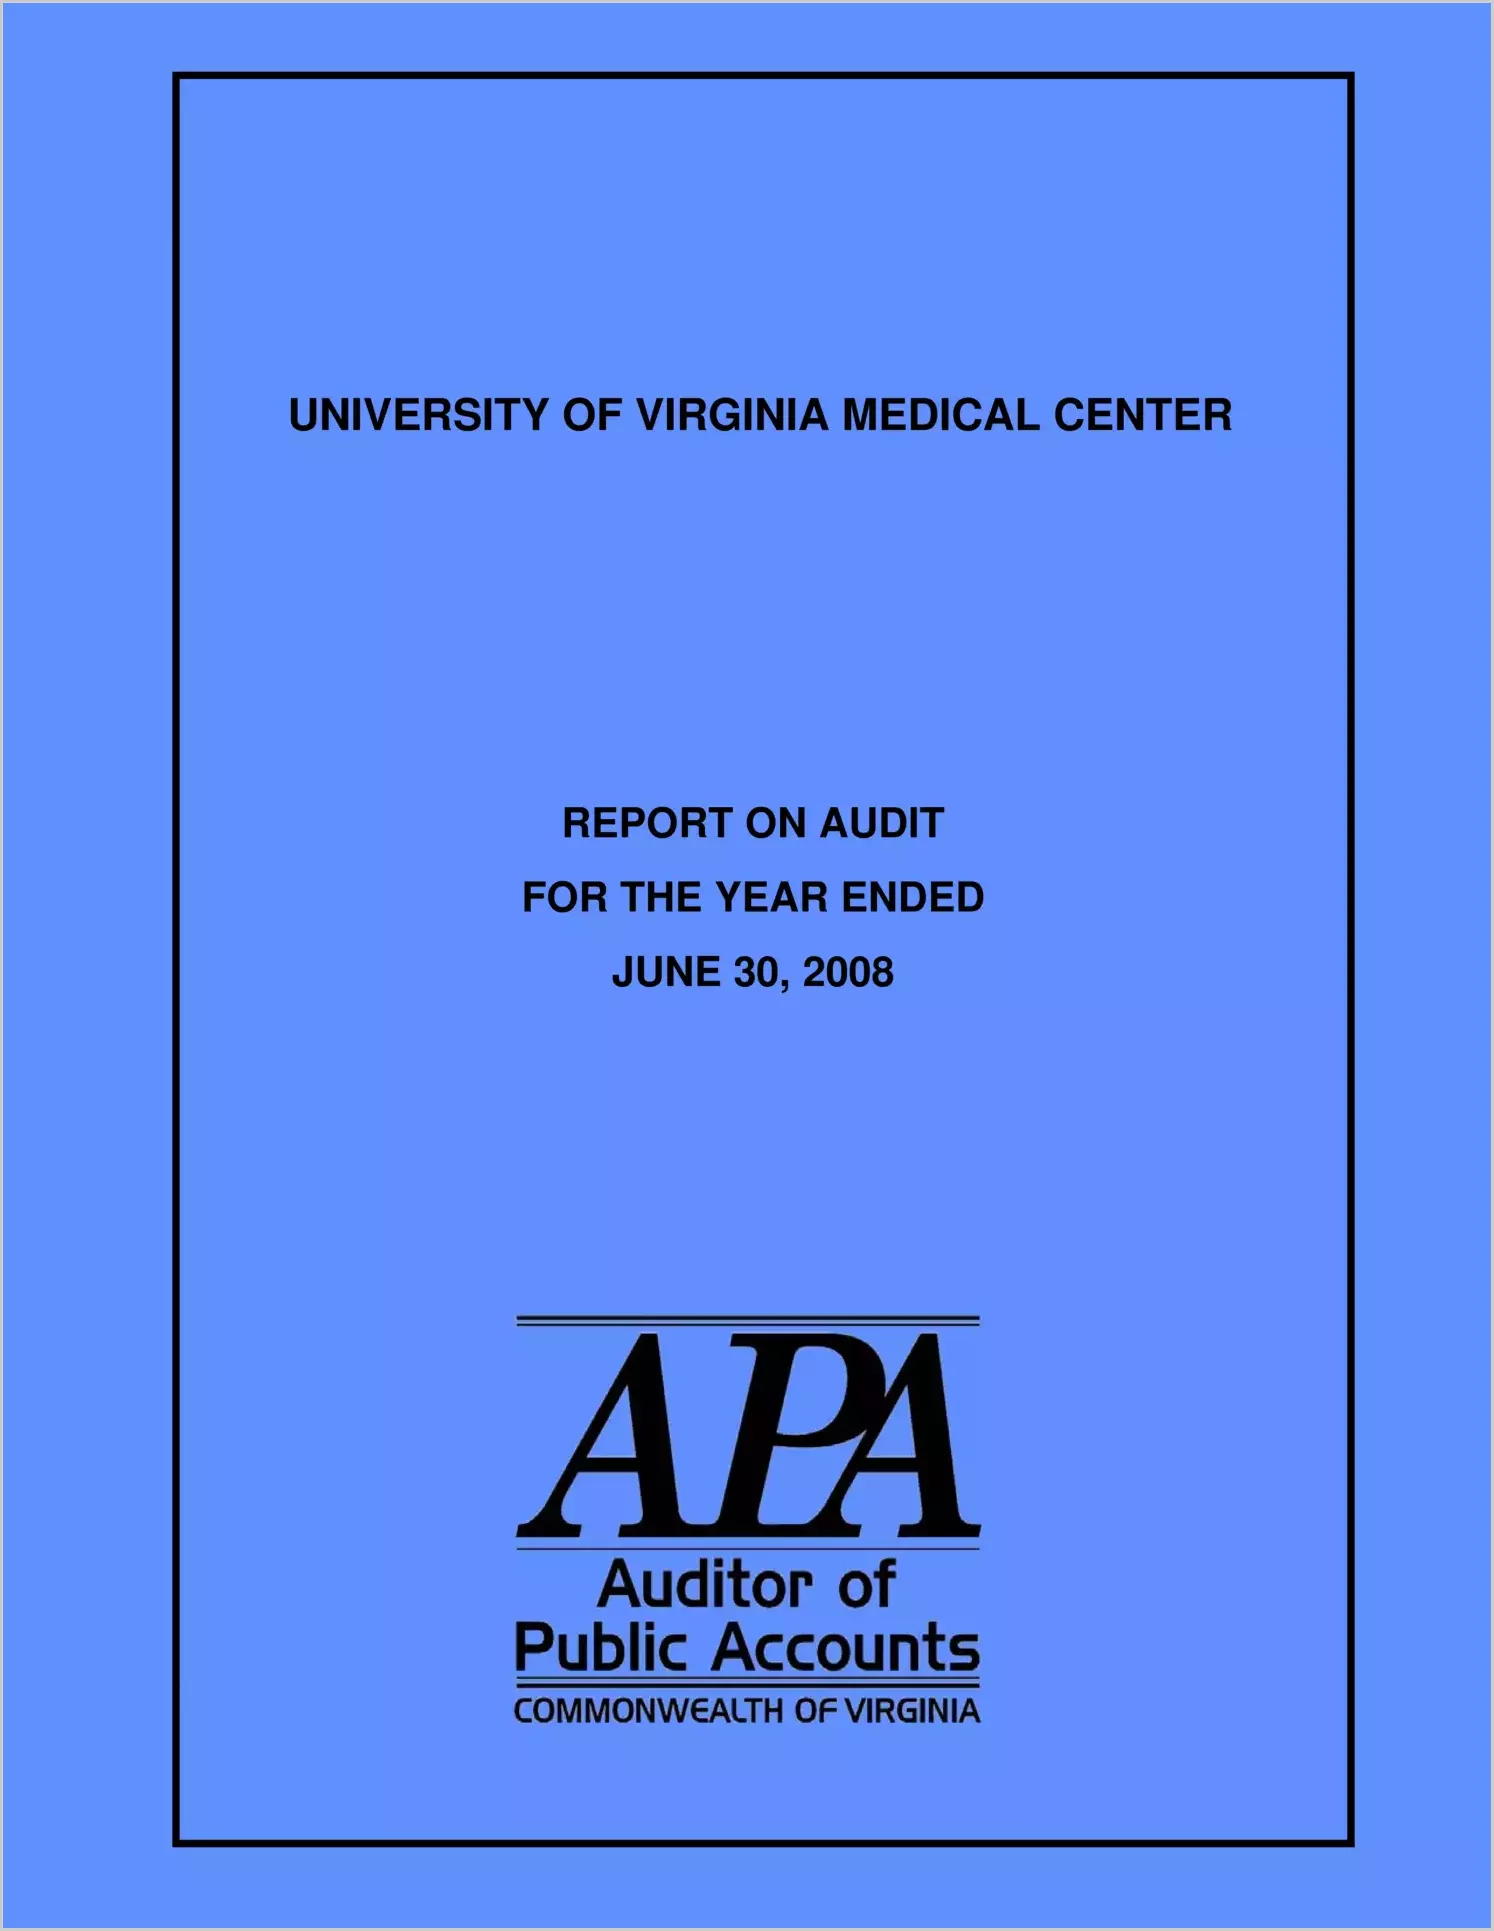 University of Virginia Medical Center for the year ended June 30, 2008